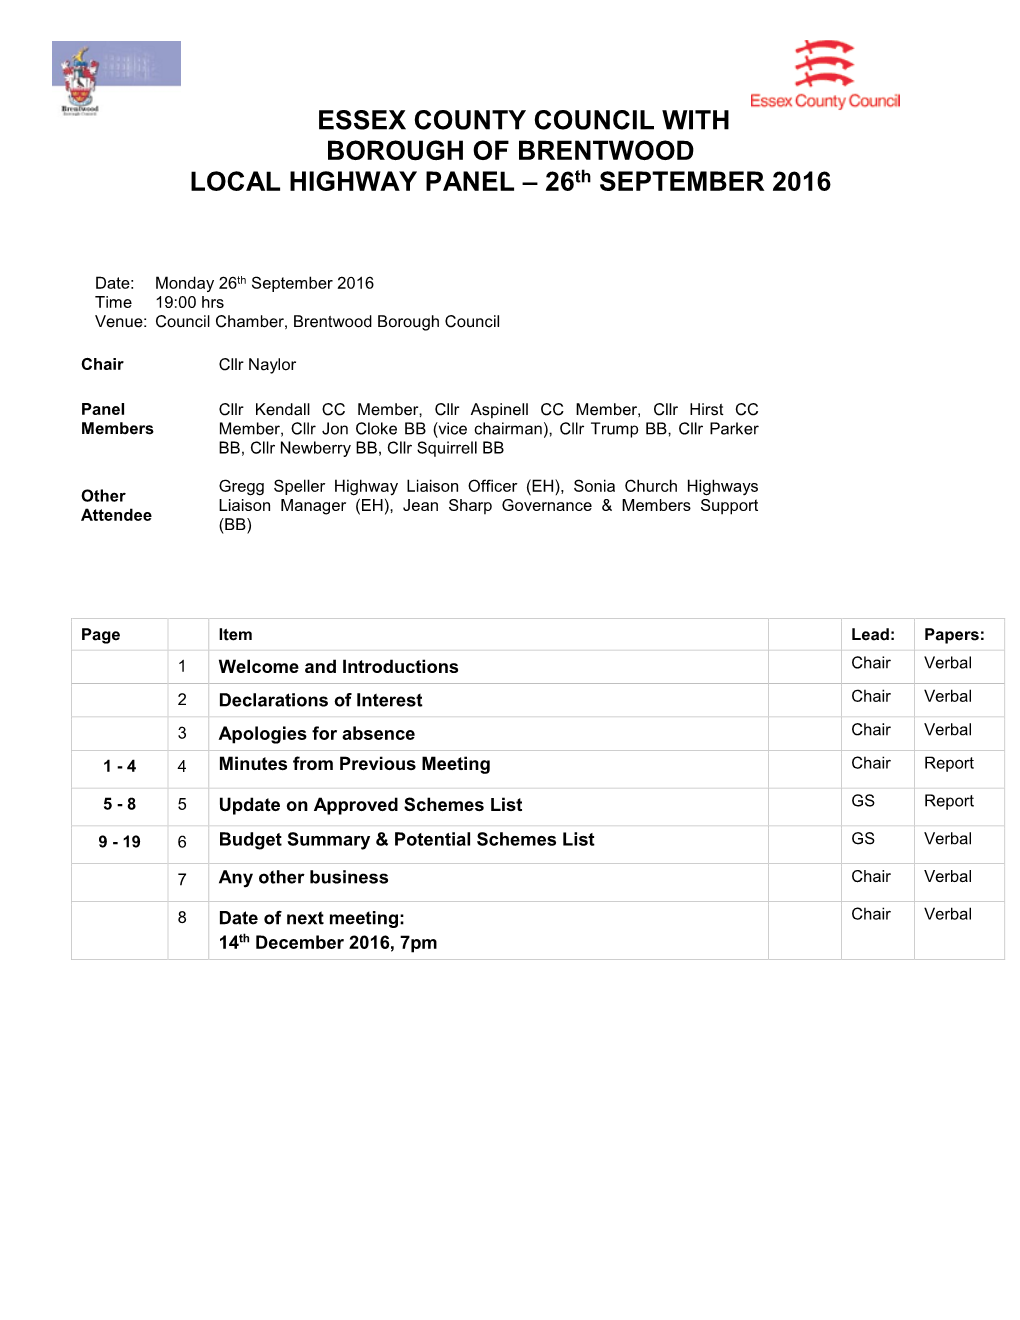 ESSEX COUNTY COUNCIL with BOROUGH of BRENTWOOD LOCAL HIGHWAY PANEL – 26Th SEPTEMBER 2016